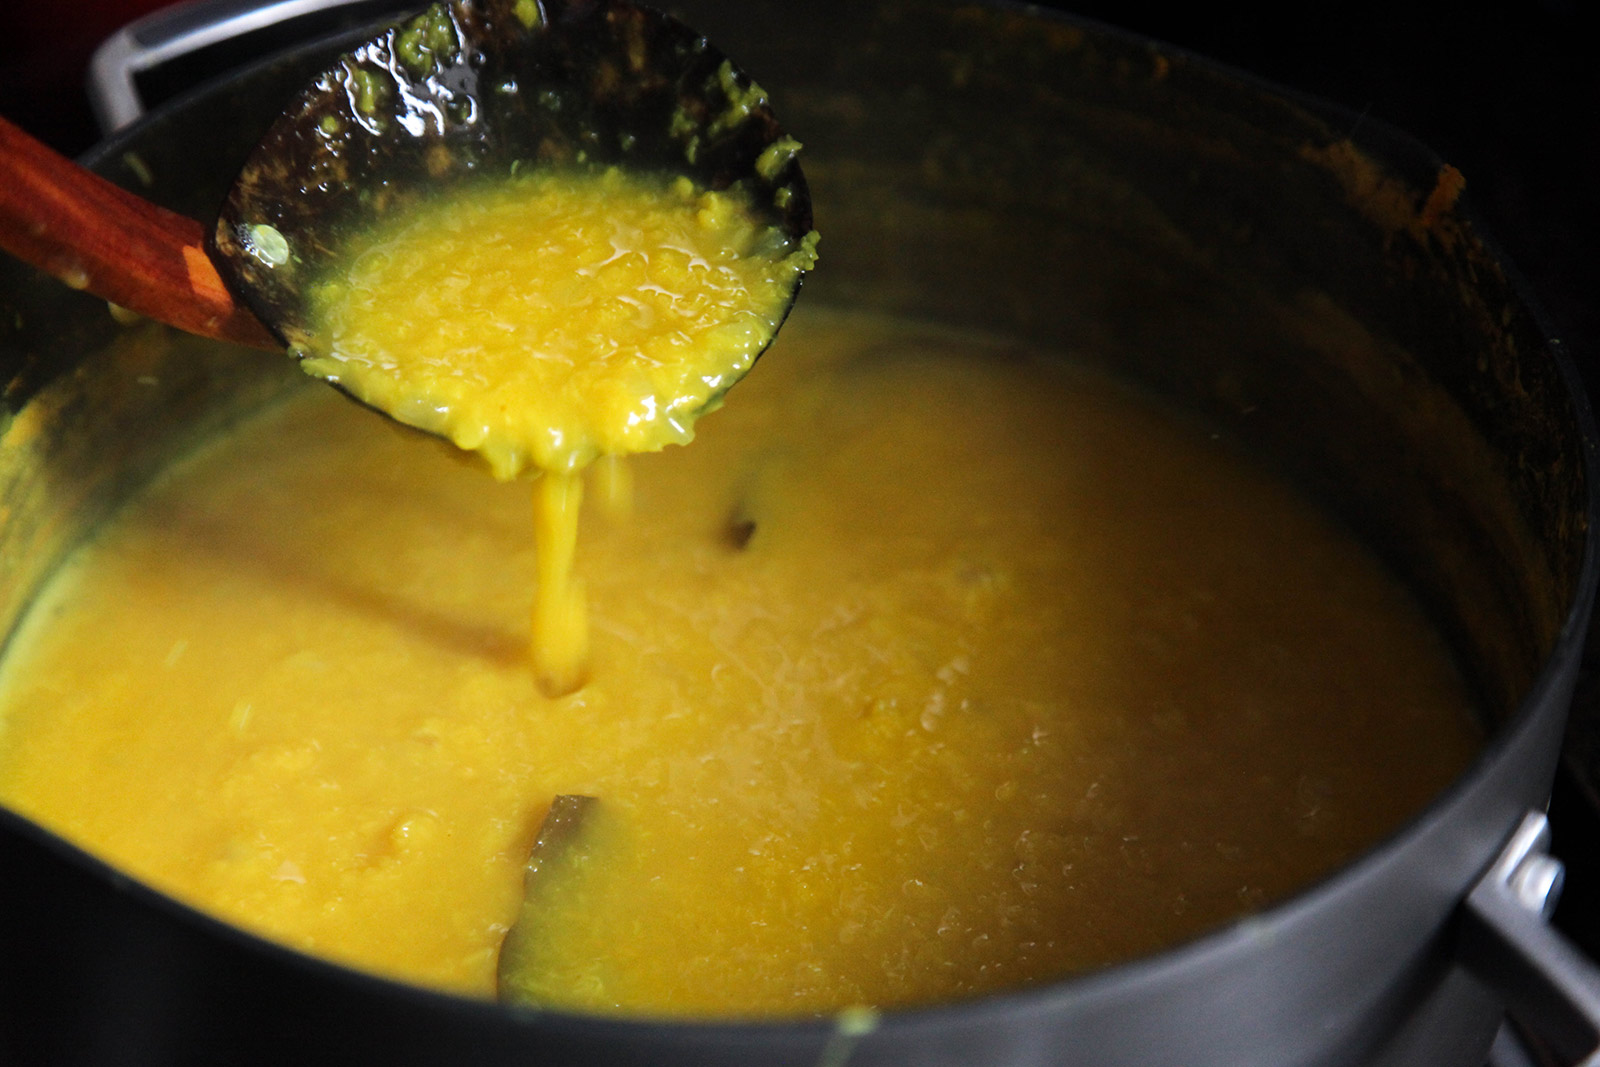 Consistency of Cooked Golden Yellow Dal (Lentil Soup) with Turmeric, Garlic, Cilantro.